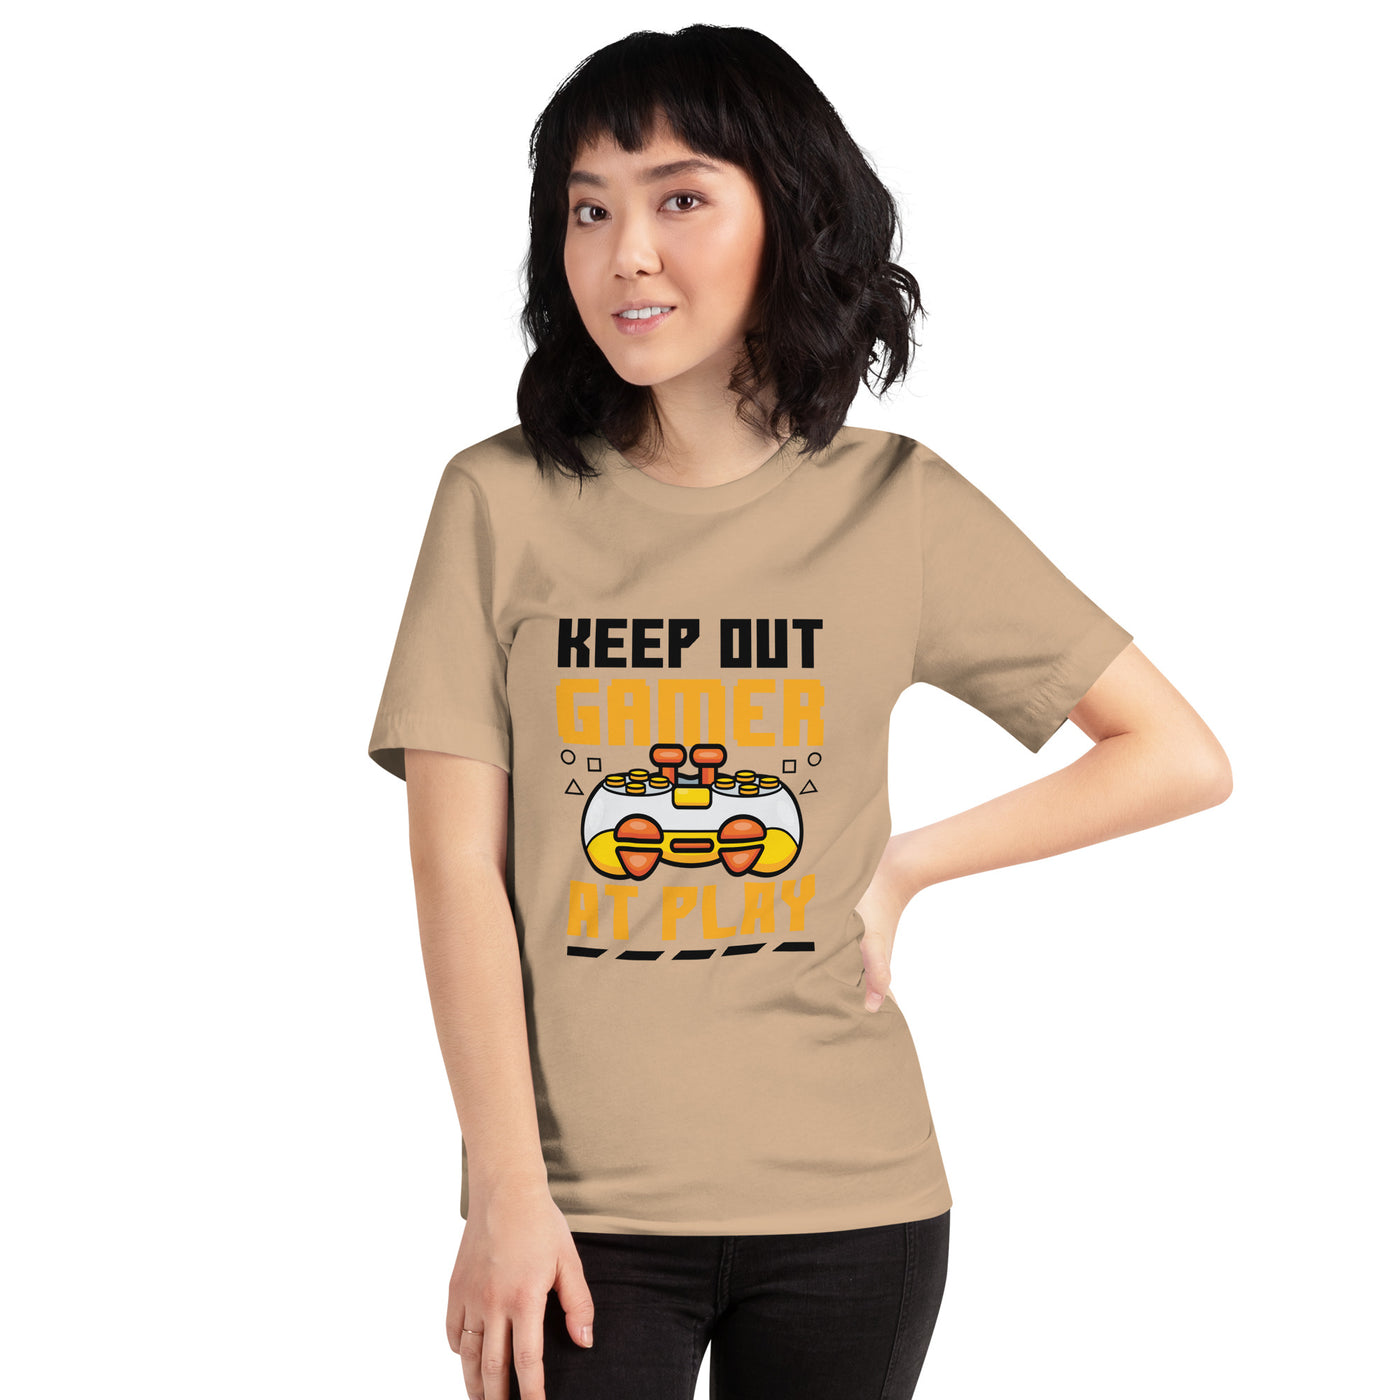 Keep Out Gamer At Play Rima 7 in Dark Text - Unisex t-shirt ( Back Print )